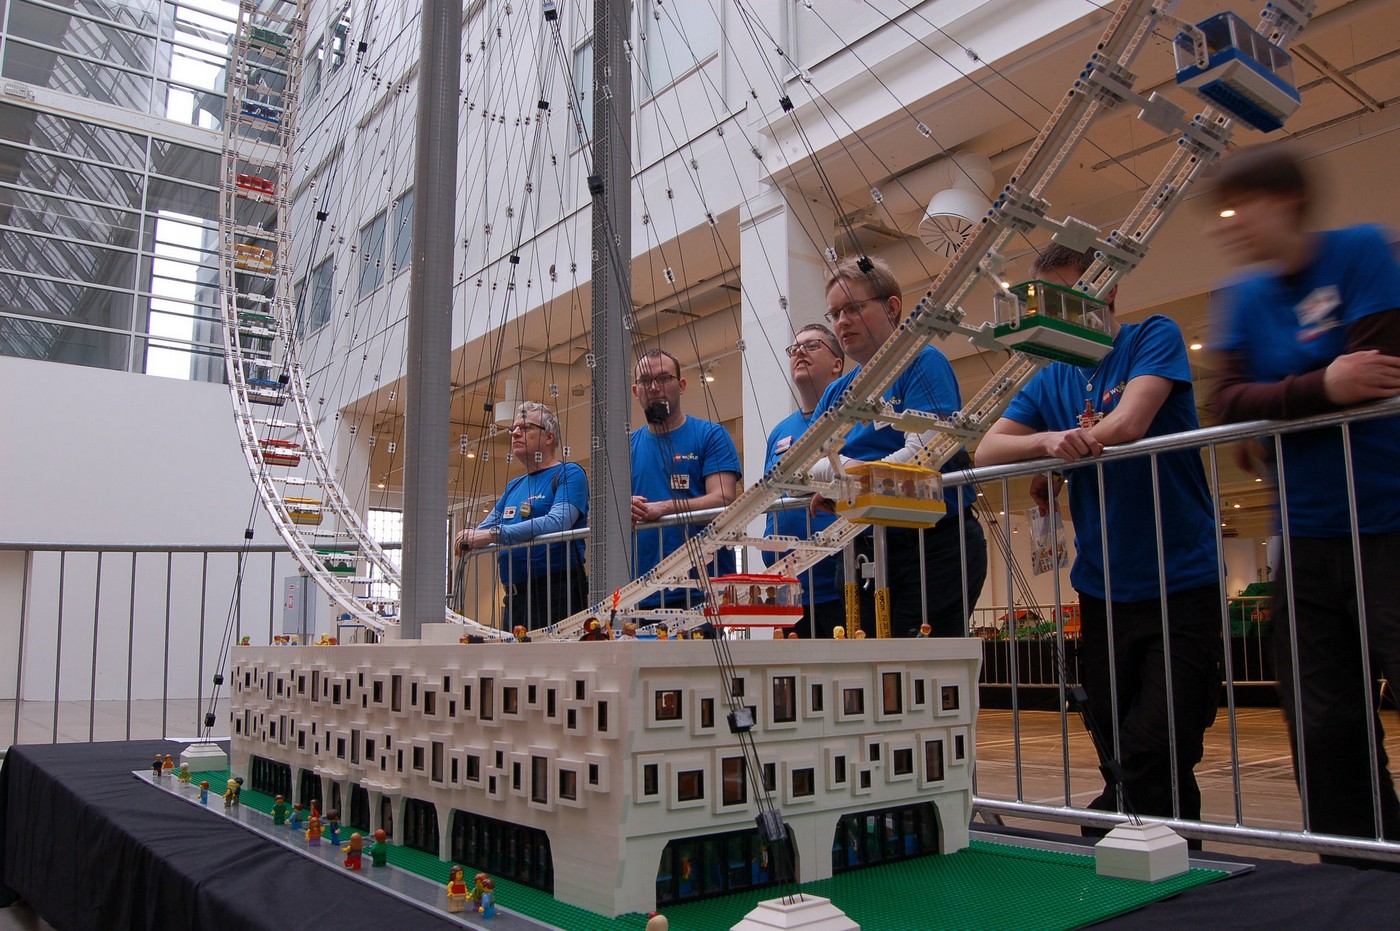 Check out the world’s largest Lego Ferris Wheel that is a 12foothigh